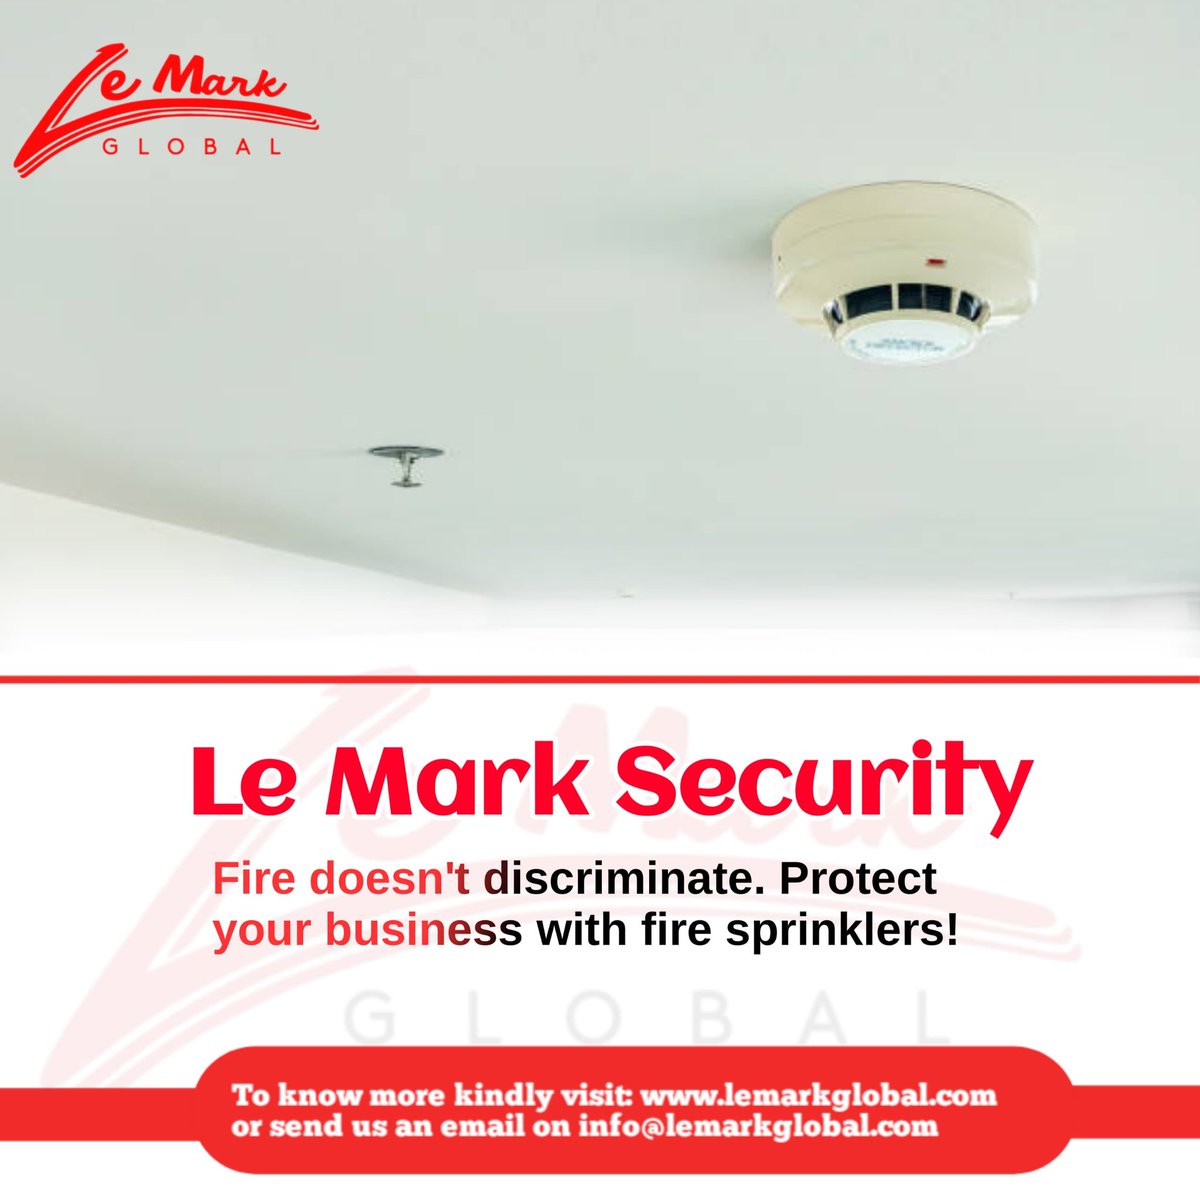 Fire doesn't discriminate. Protect your business with fire sprinklers!

Click for a taste of something new.
lemarkglobal.com

#firesafety #fireprevention #homesafety #firesprinklers #fireprotection #fireawareness #firesuppression #firealarm #safetyfirst #peaceofmind